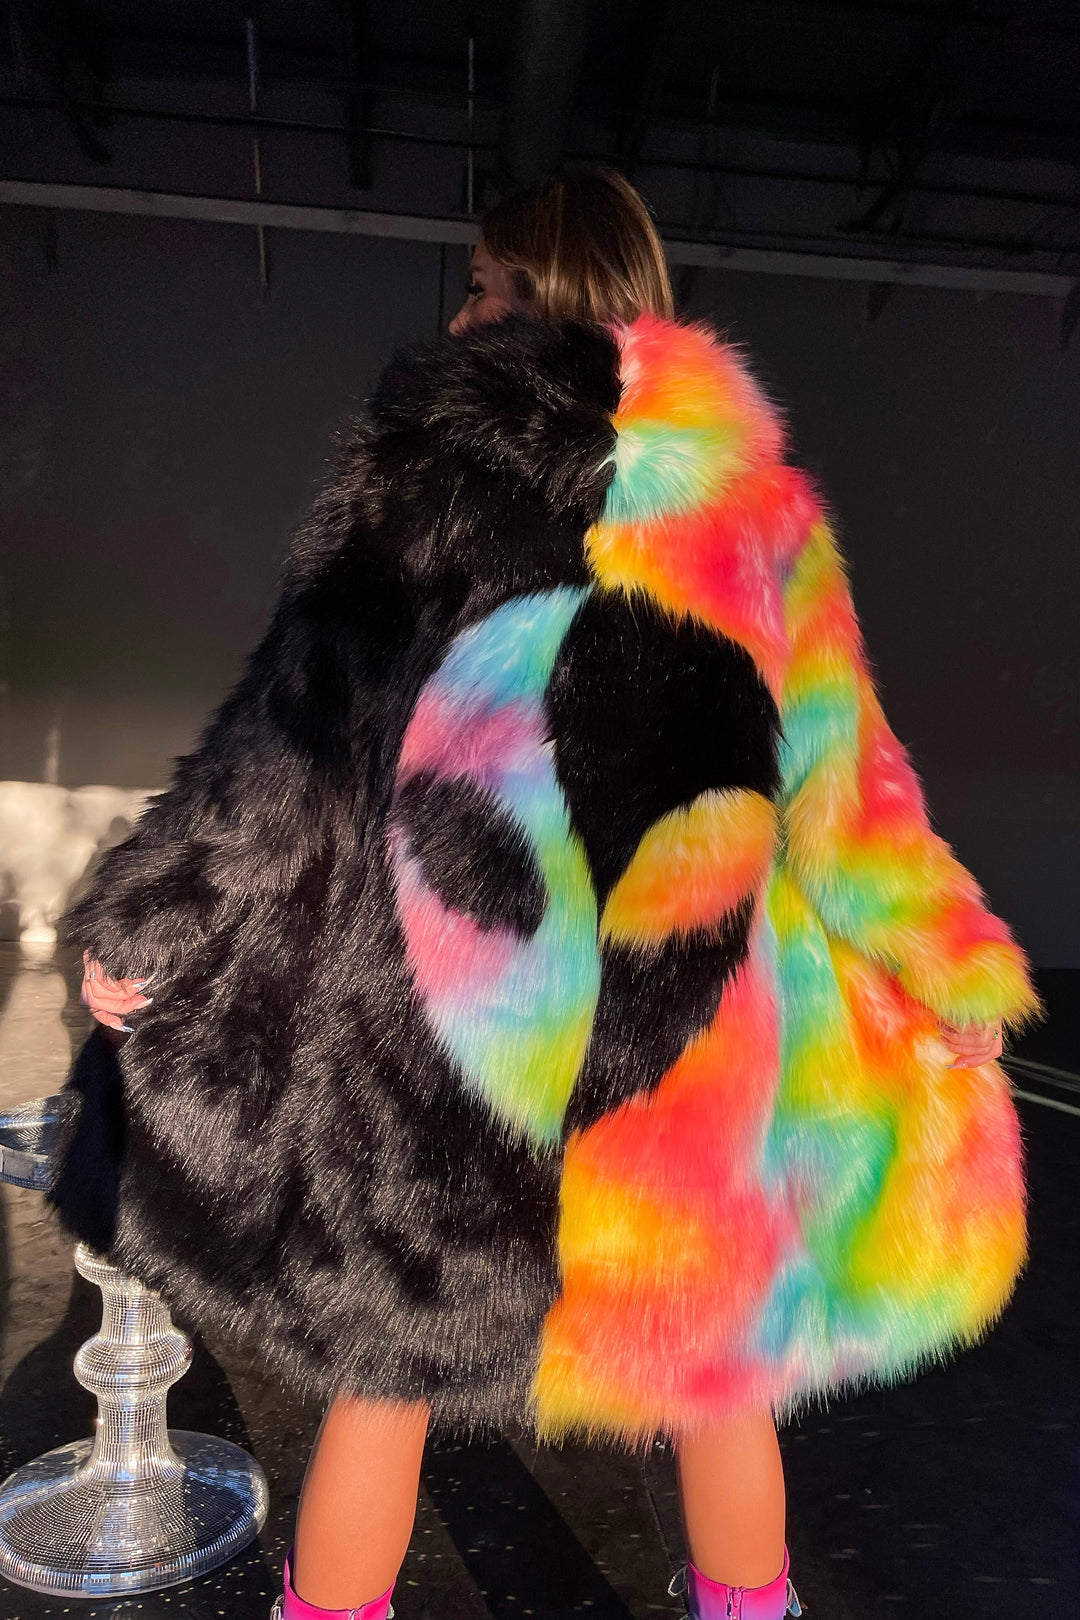 Area 51 alt text: Area 51 Alien face coat black and neon rainbow faux fur by Space island. Spvce Island is a wearable art collective featuring festival fashion, rave wear, club wear and streetwear. Buy coats, jackets, platform boots, gogo boots, rainbow platform sneakers, holographic sandals, shoes, burning man goggles, crystal chokers, holographic corsets, joggers, rave bottoms, bikinis, harnesses, bondage and more. 